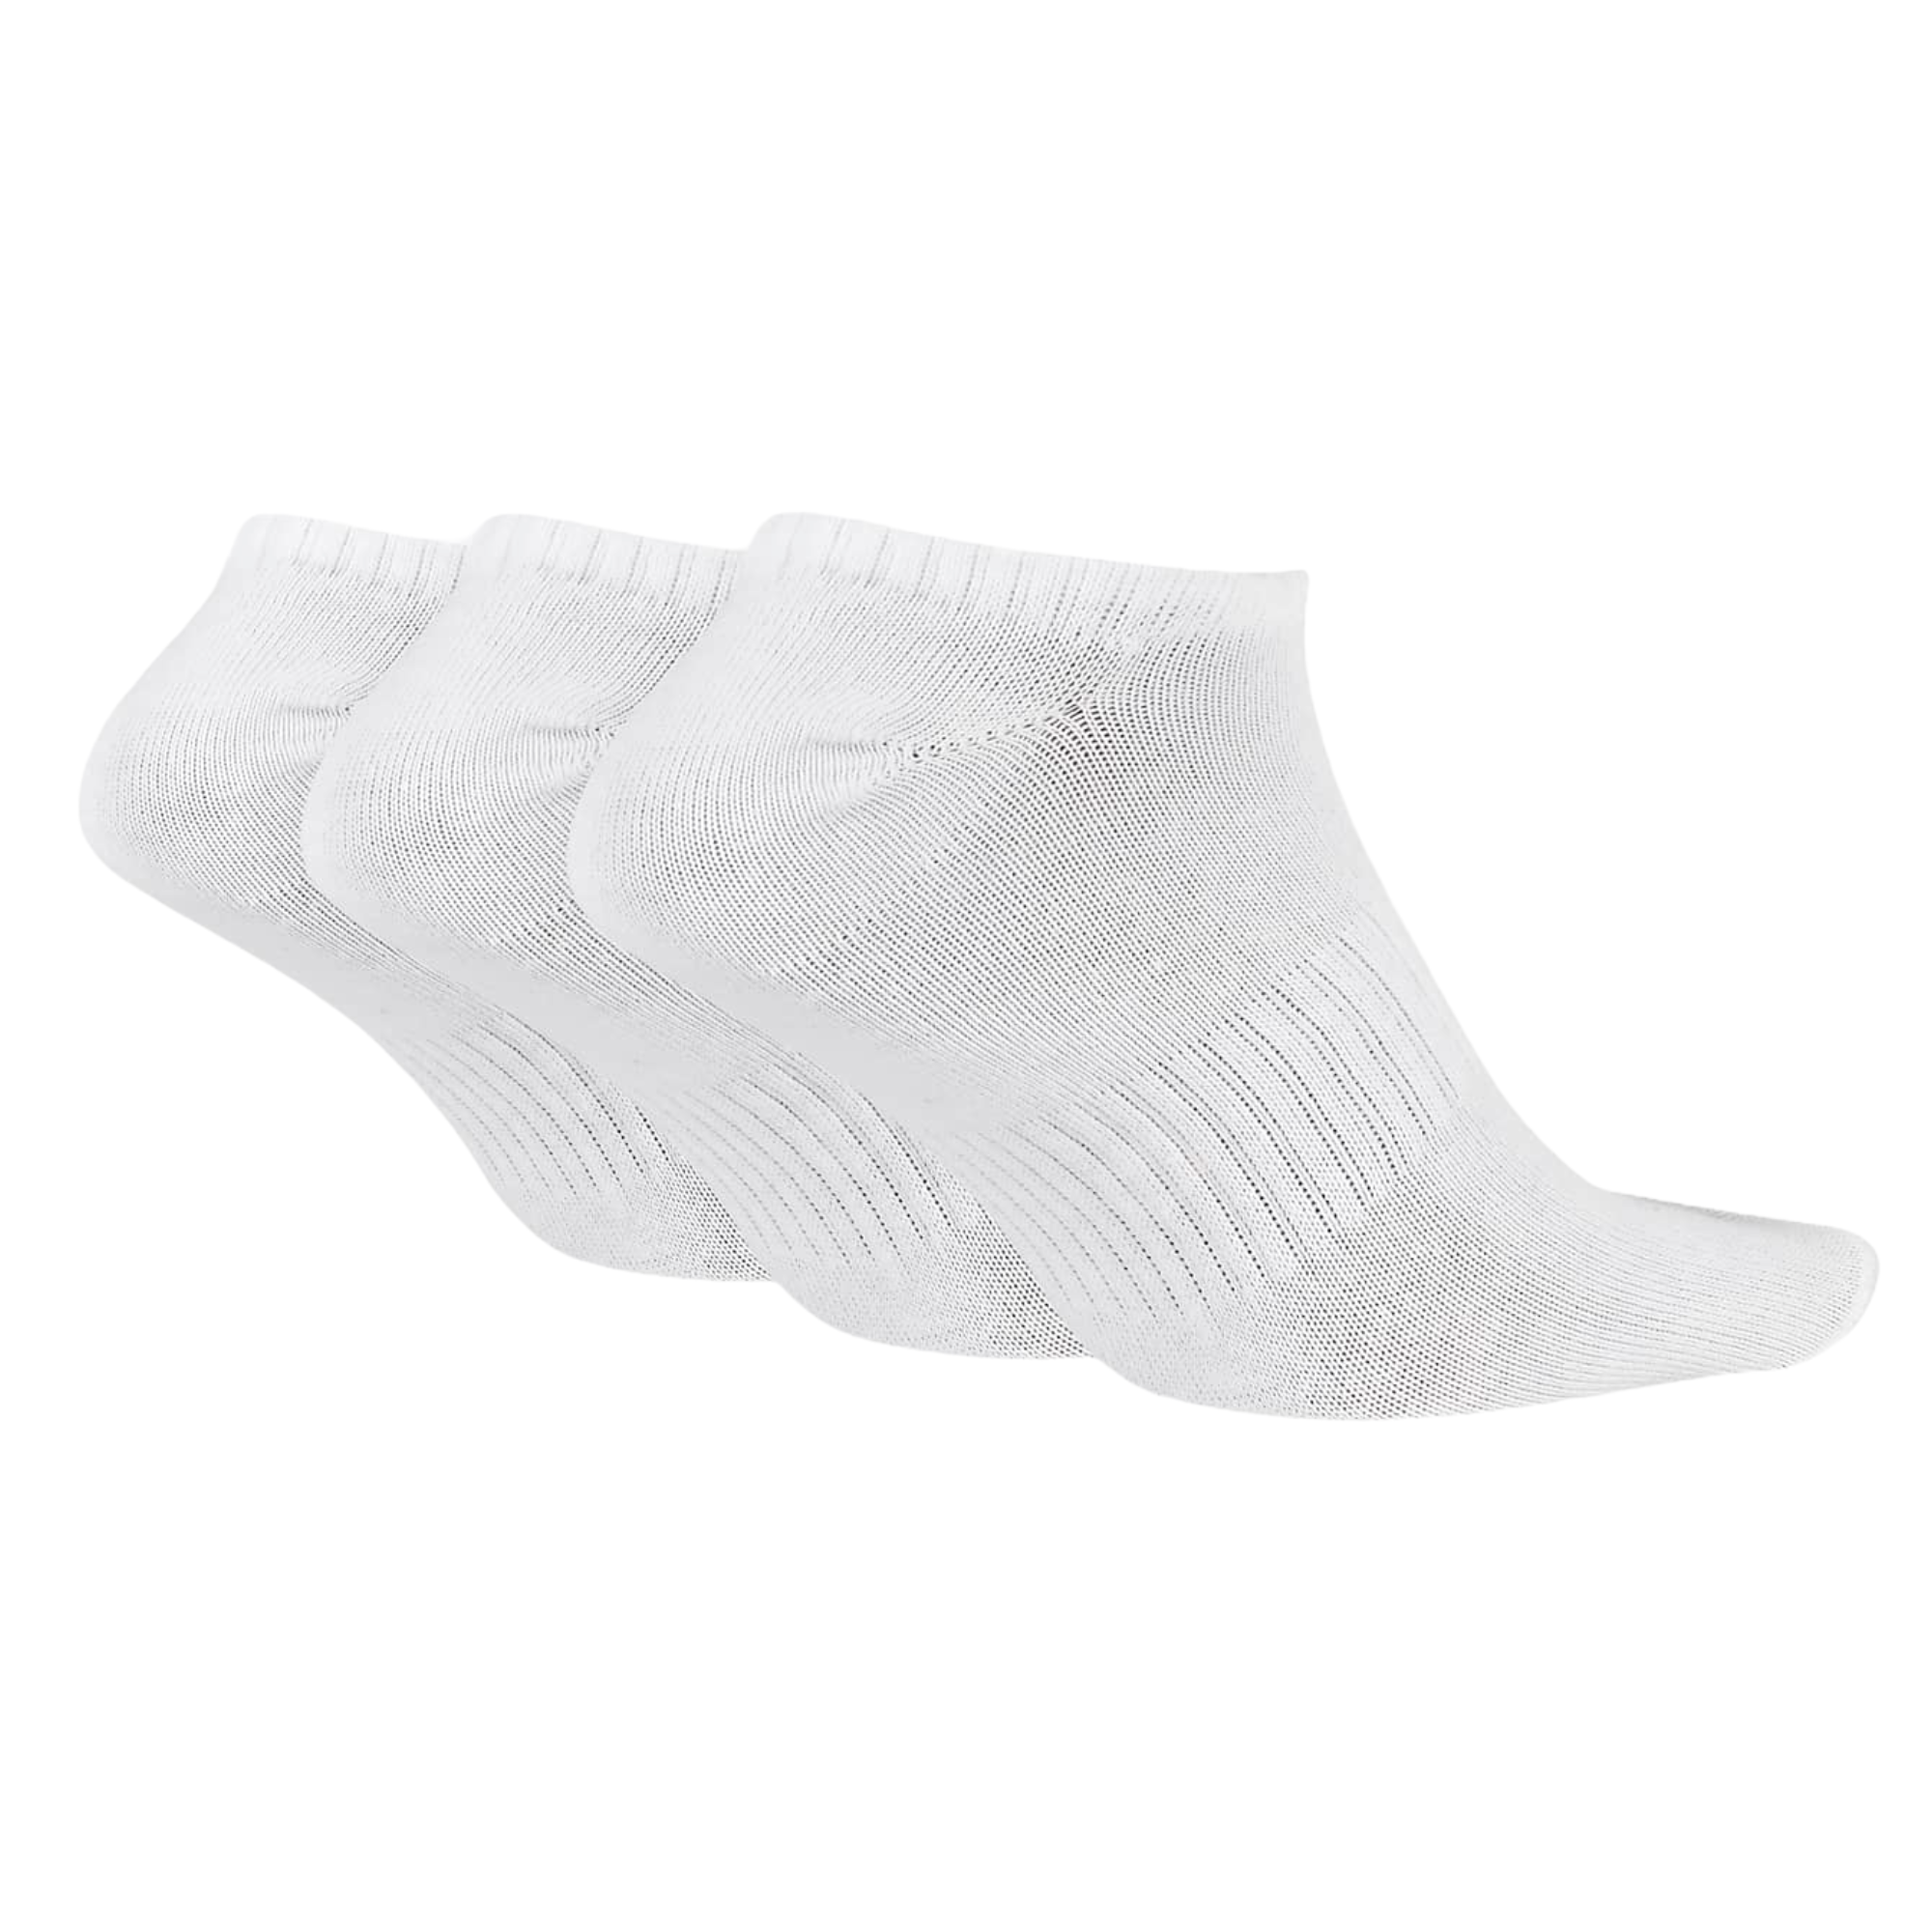 Nike SB Everyday Lightweight No Show Socks (3 Pack) White - Orchard